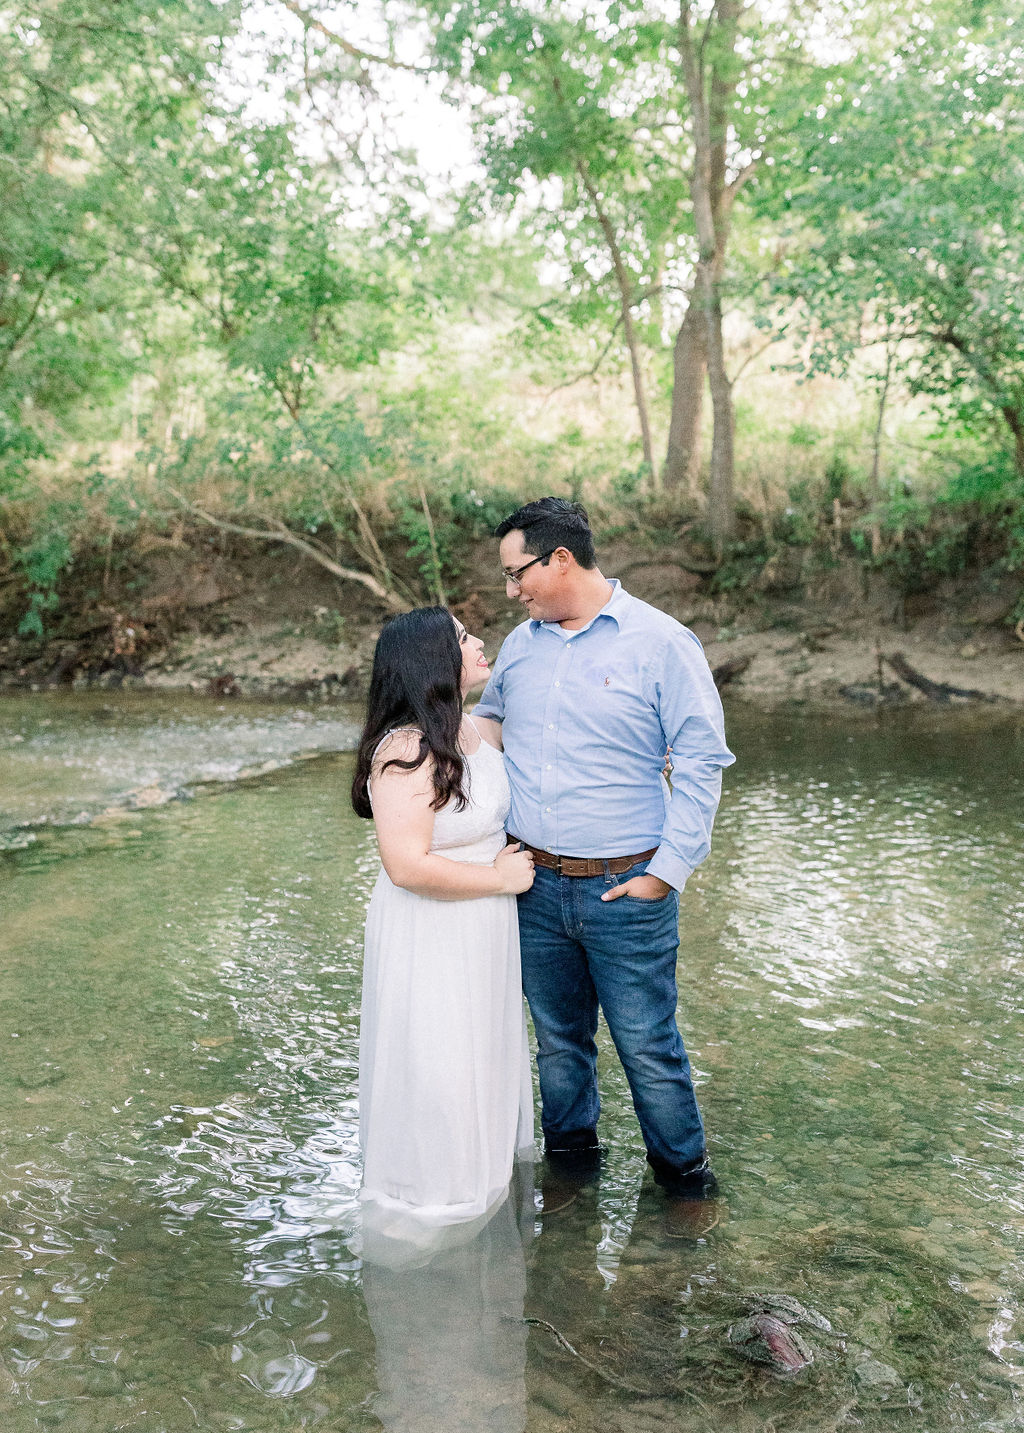 River Engagement Pictures at Cibolo Nature Center, Anna Kay Photography, San Antonio Wedding Photographer